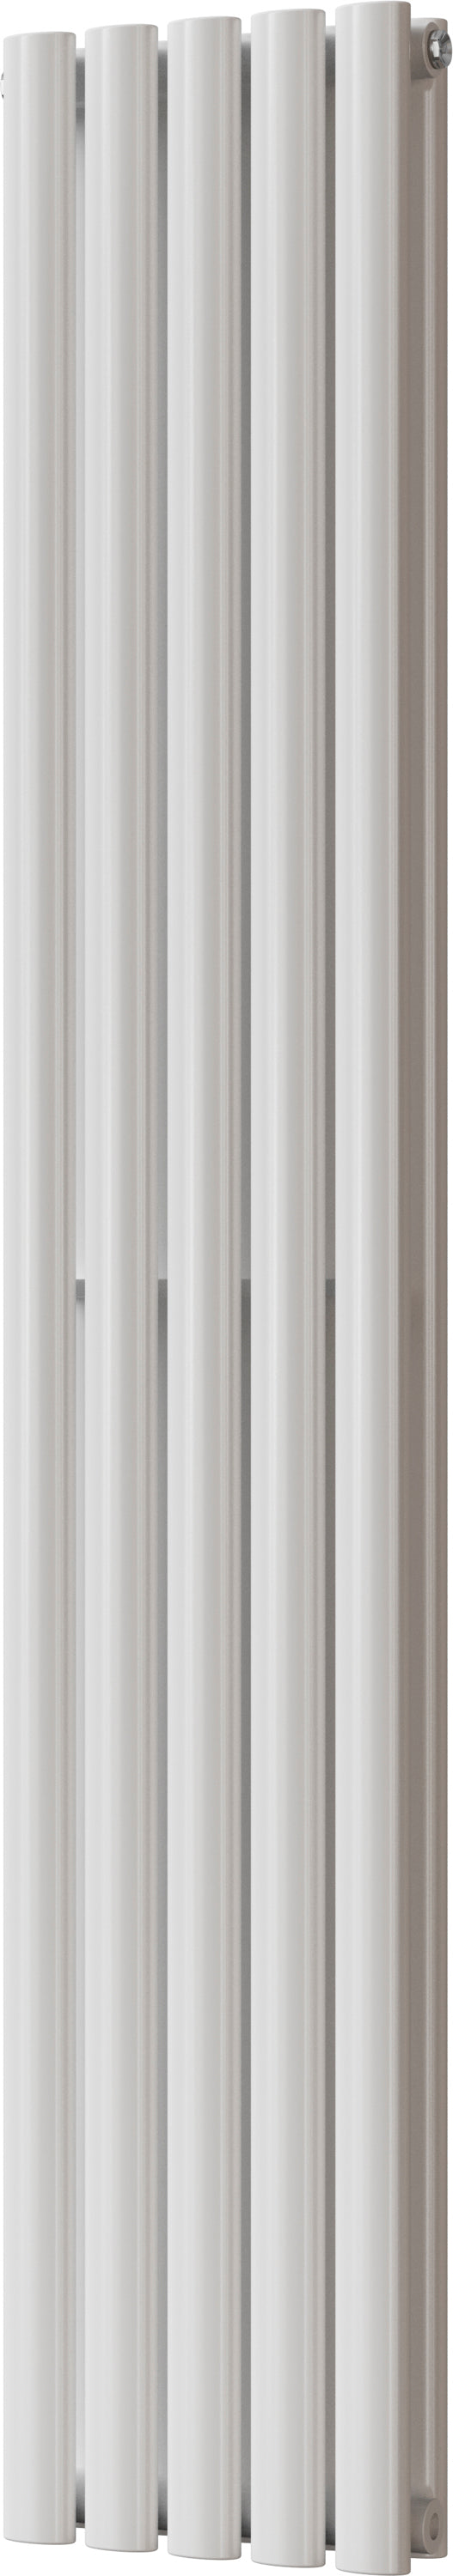 Omeara - White Vertical Radiator H1600mm x W290mm Double Panel